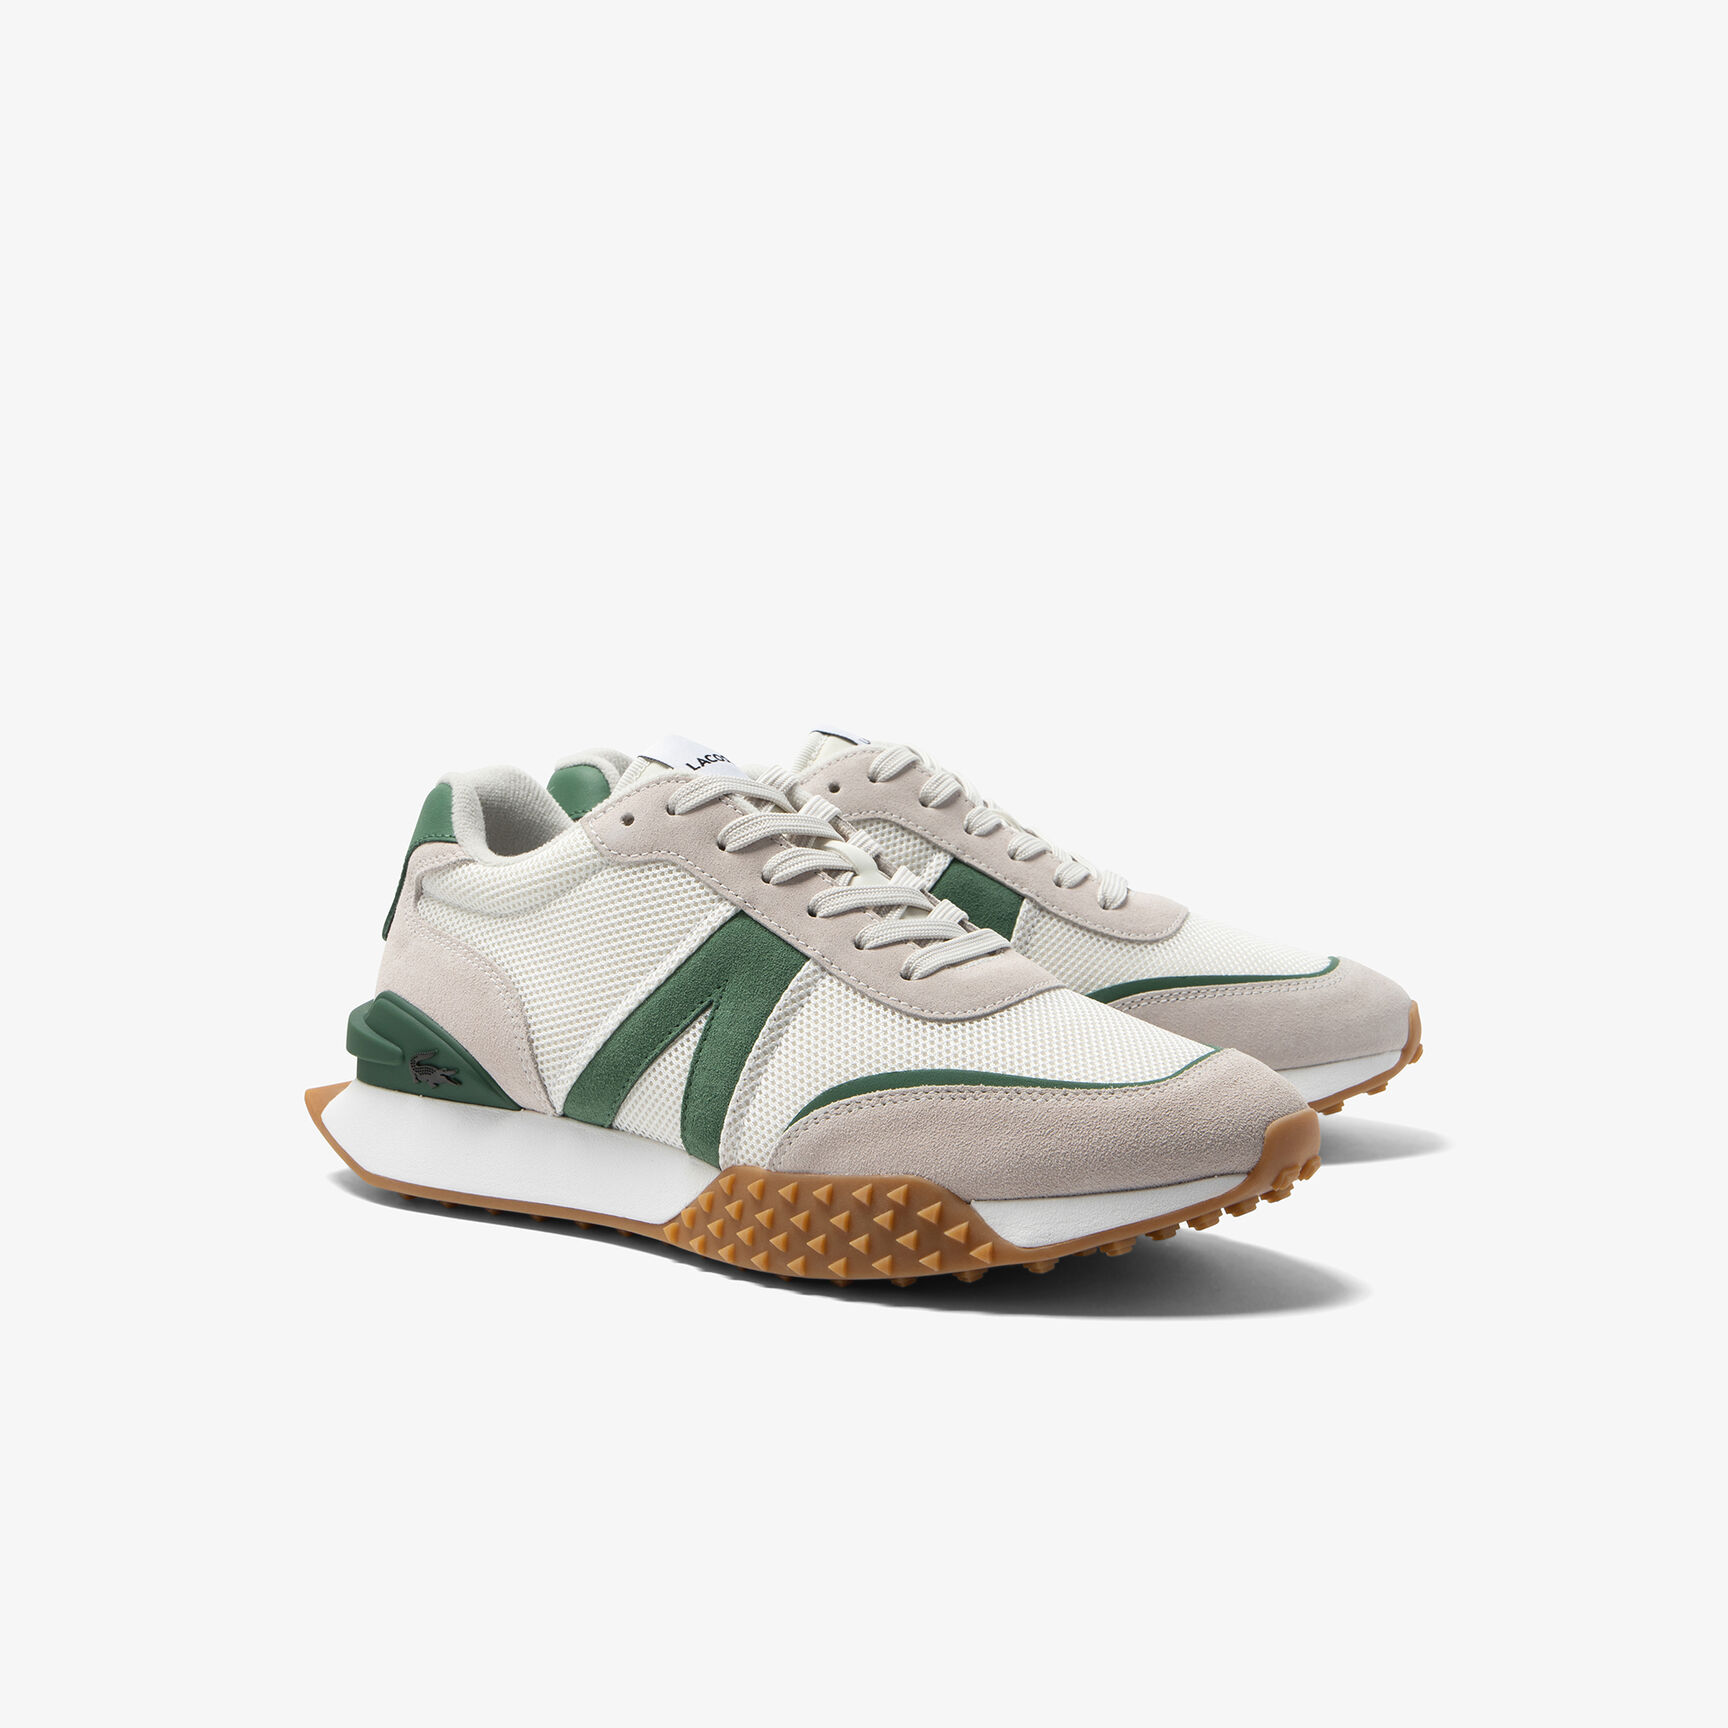 Buy Men's Lacoste L-Spin Deluxe Leather Trainers | Lacoste UAE